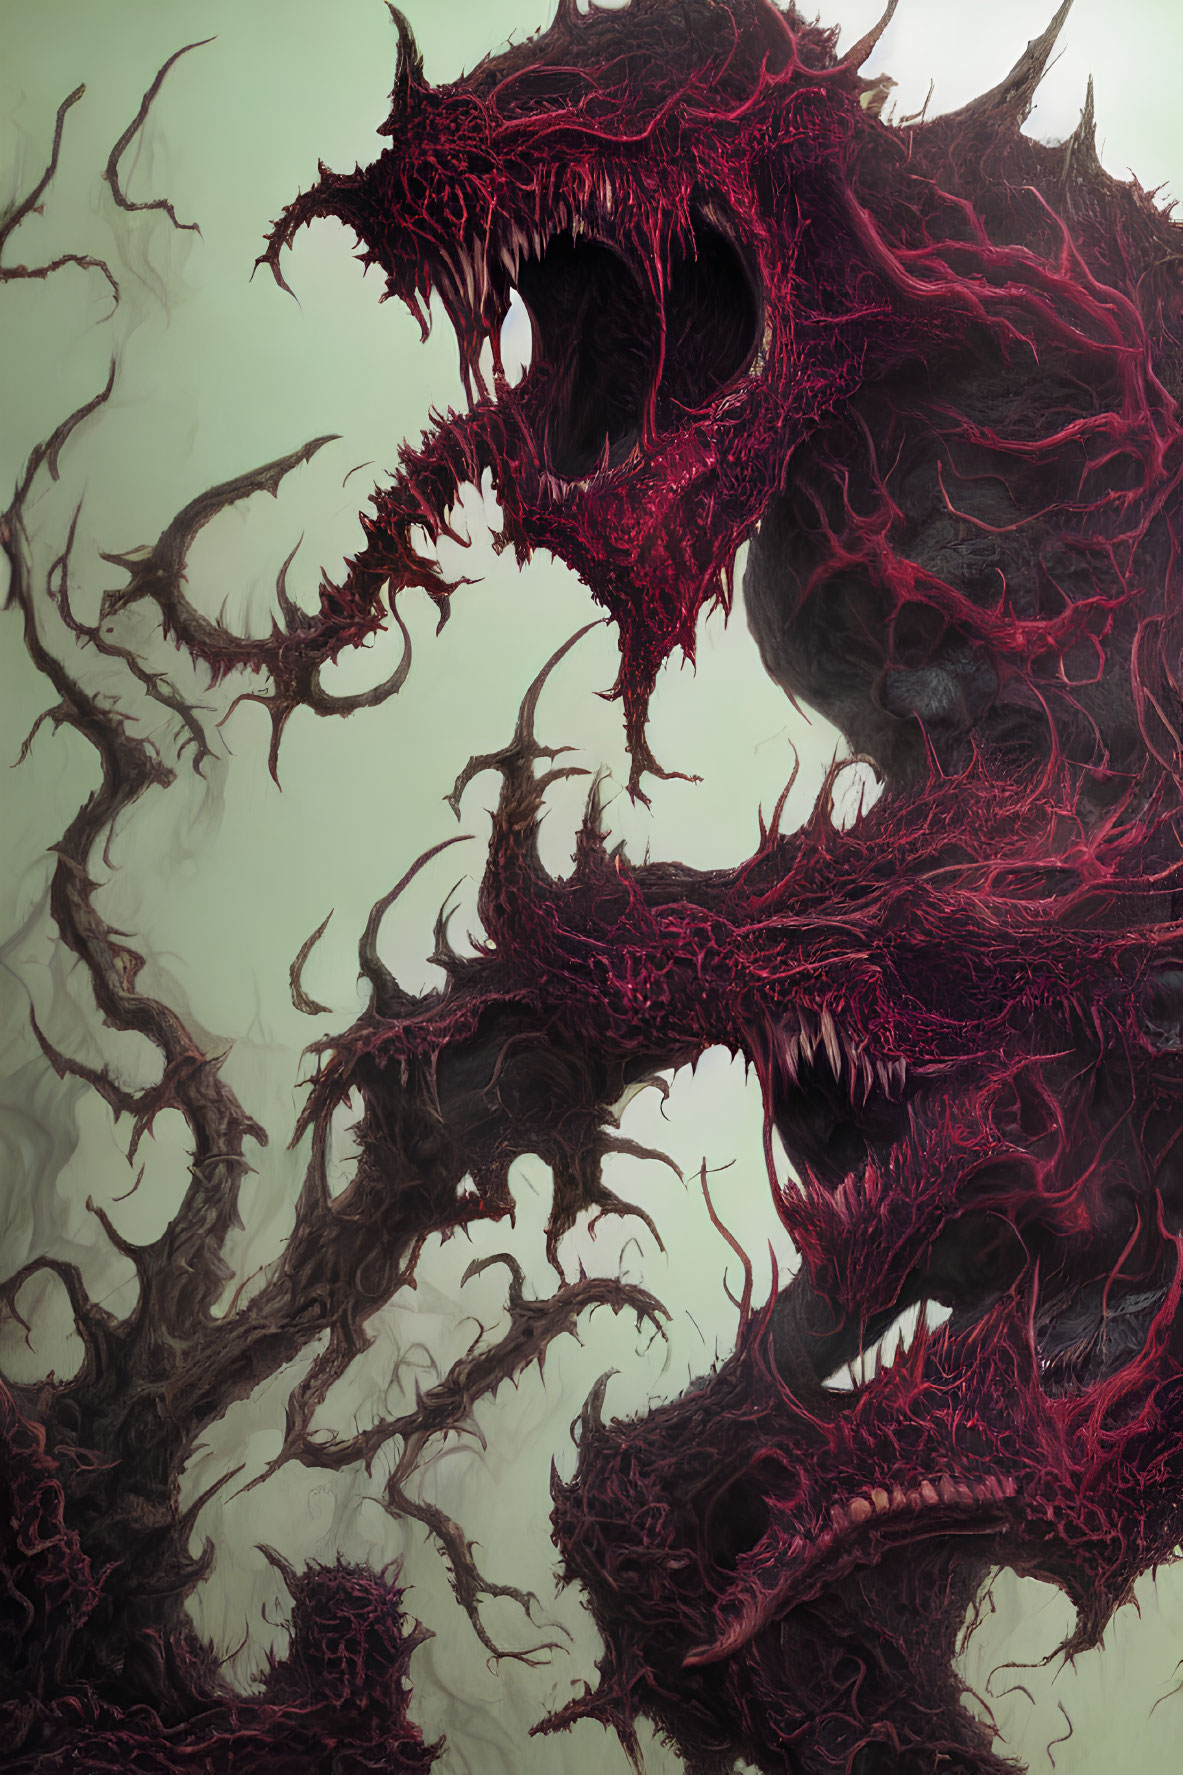 Illustration of Intertwined Red and Black Dragon-like Creatures